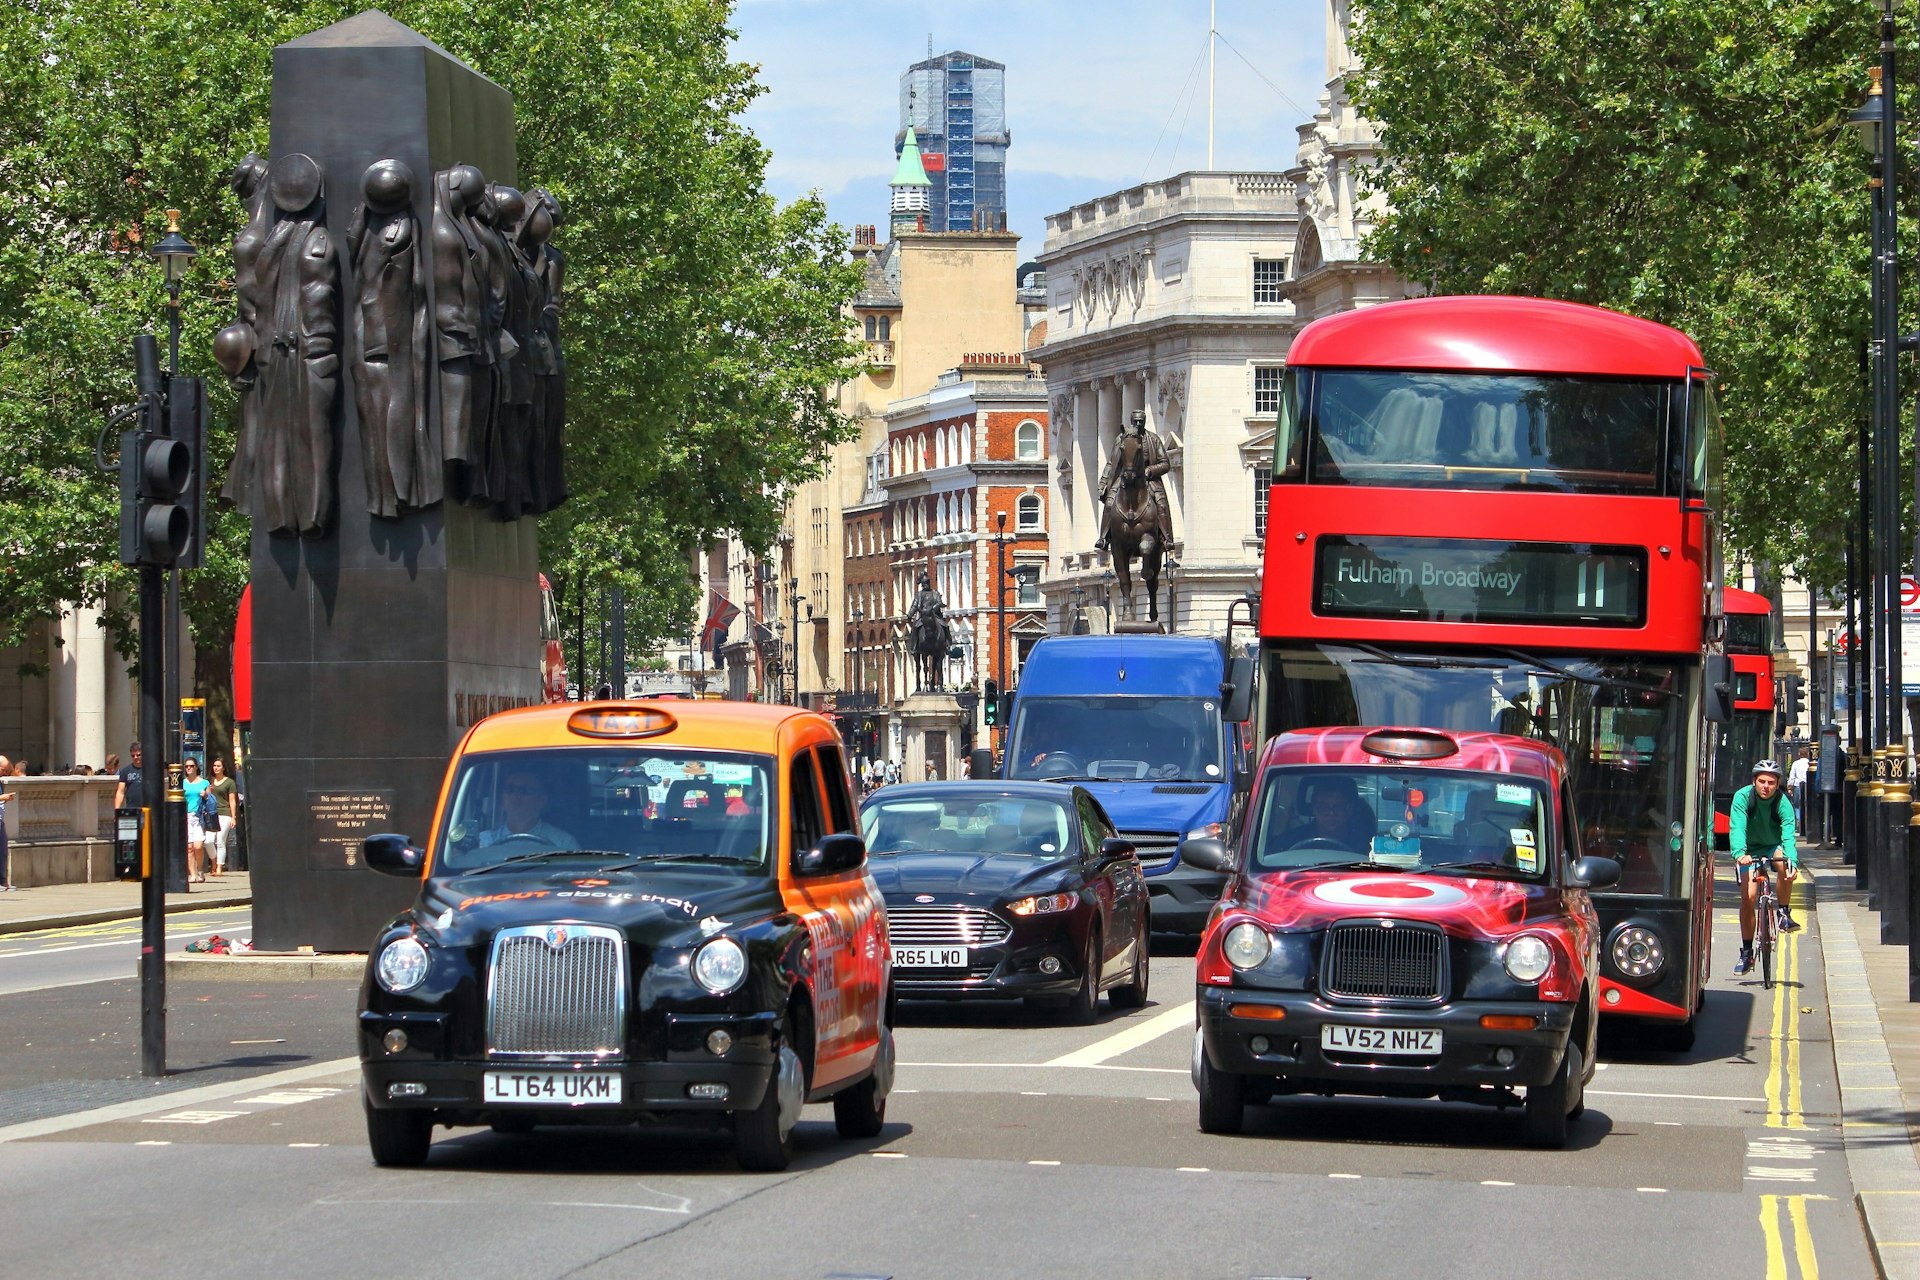 London's iconic black cabs wait at lights in front of a double-decker red bus